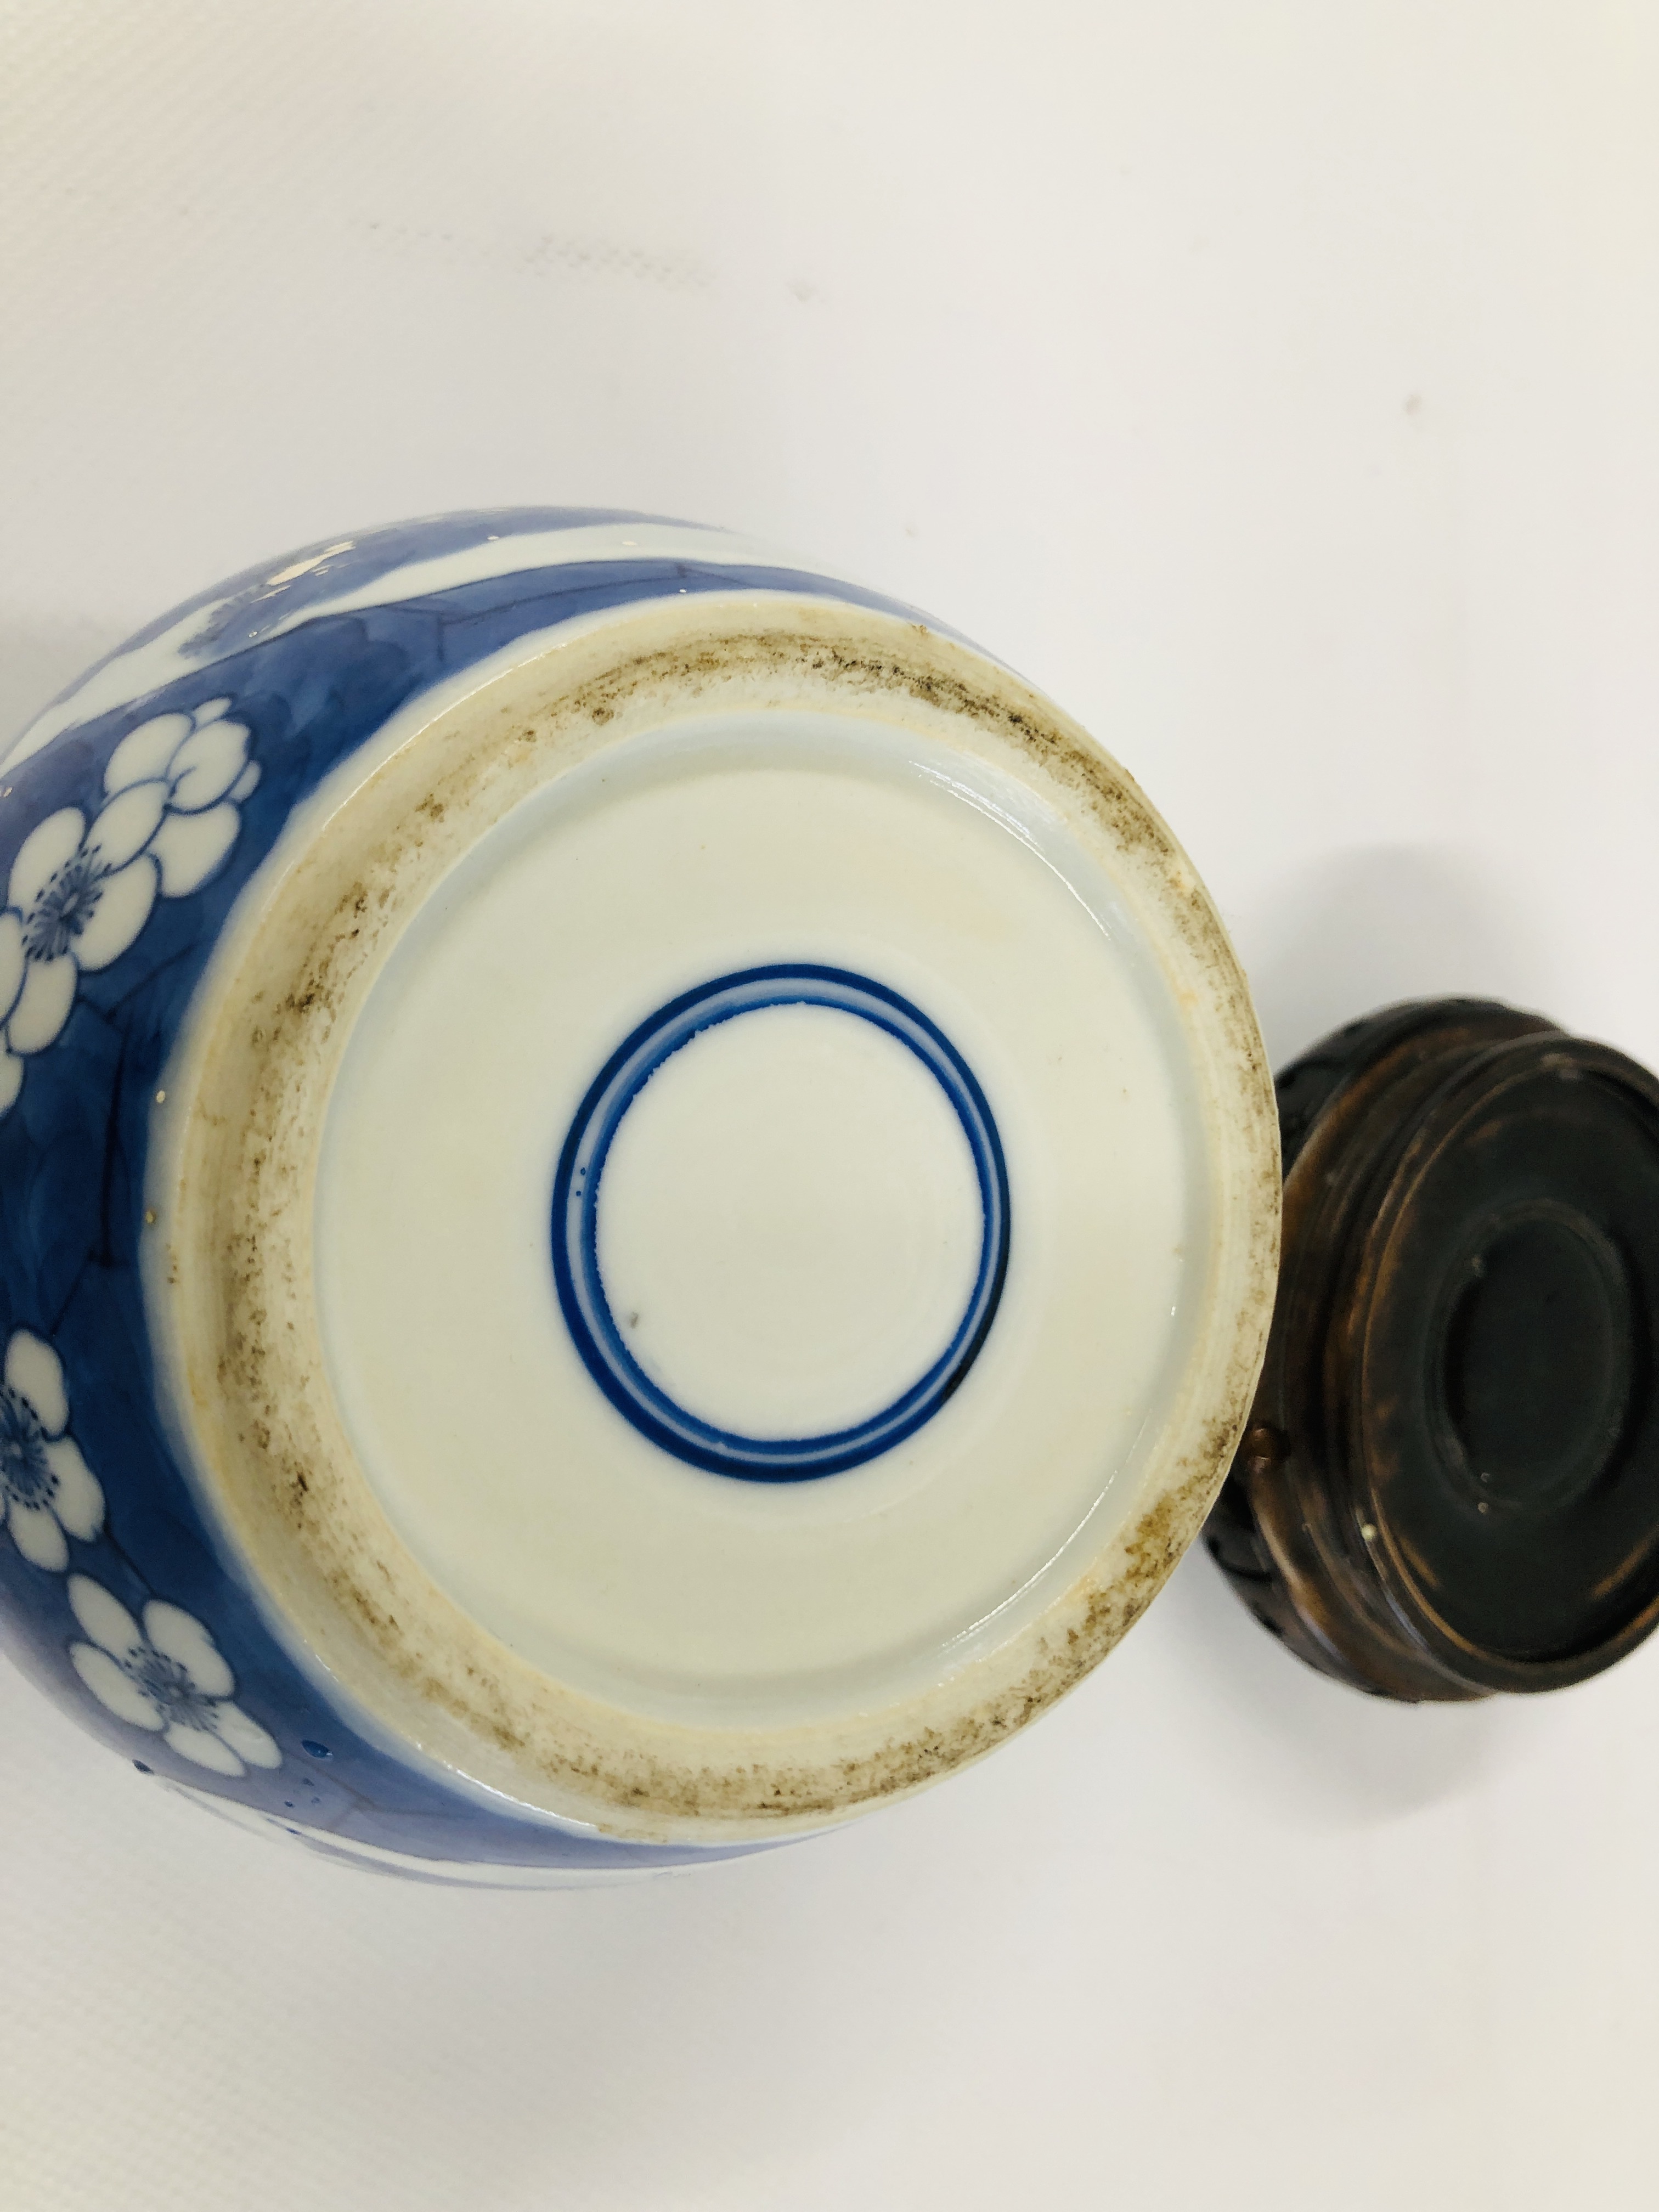 A ORIENTAL BLUE AND WHITE GINGER JAR AND STAND ALONG WITH A JAPANESE BUDDA FIGURE. - Image 10 of 10